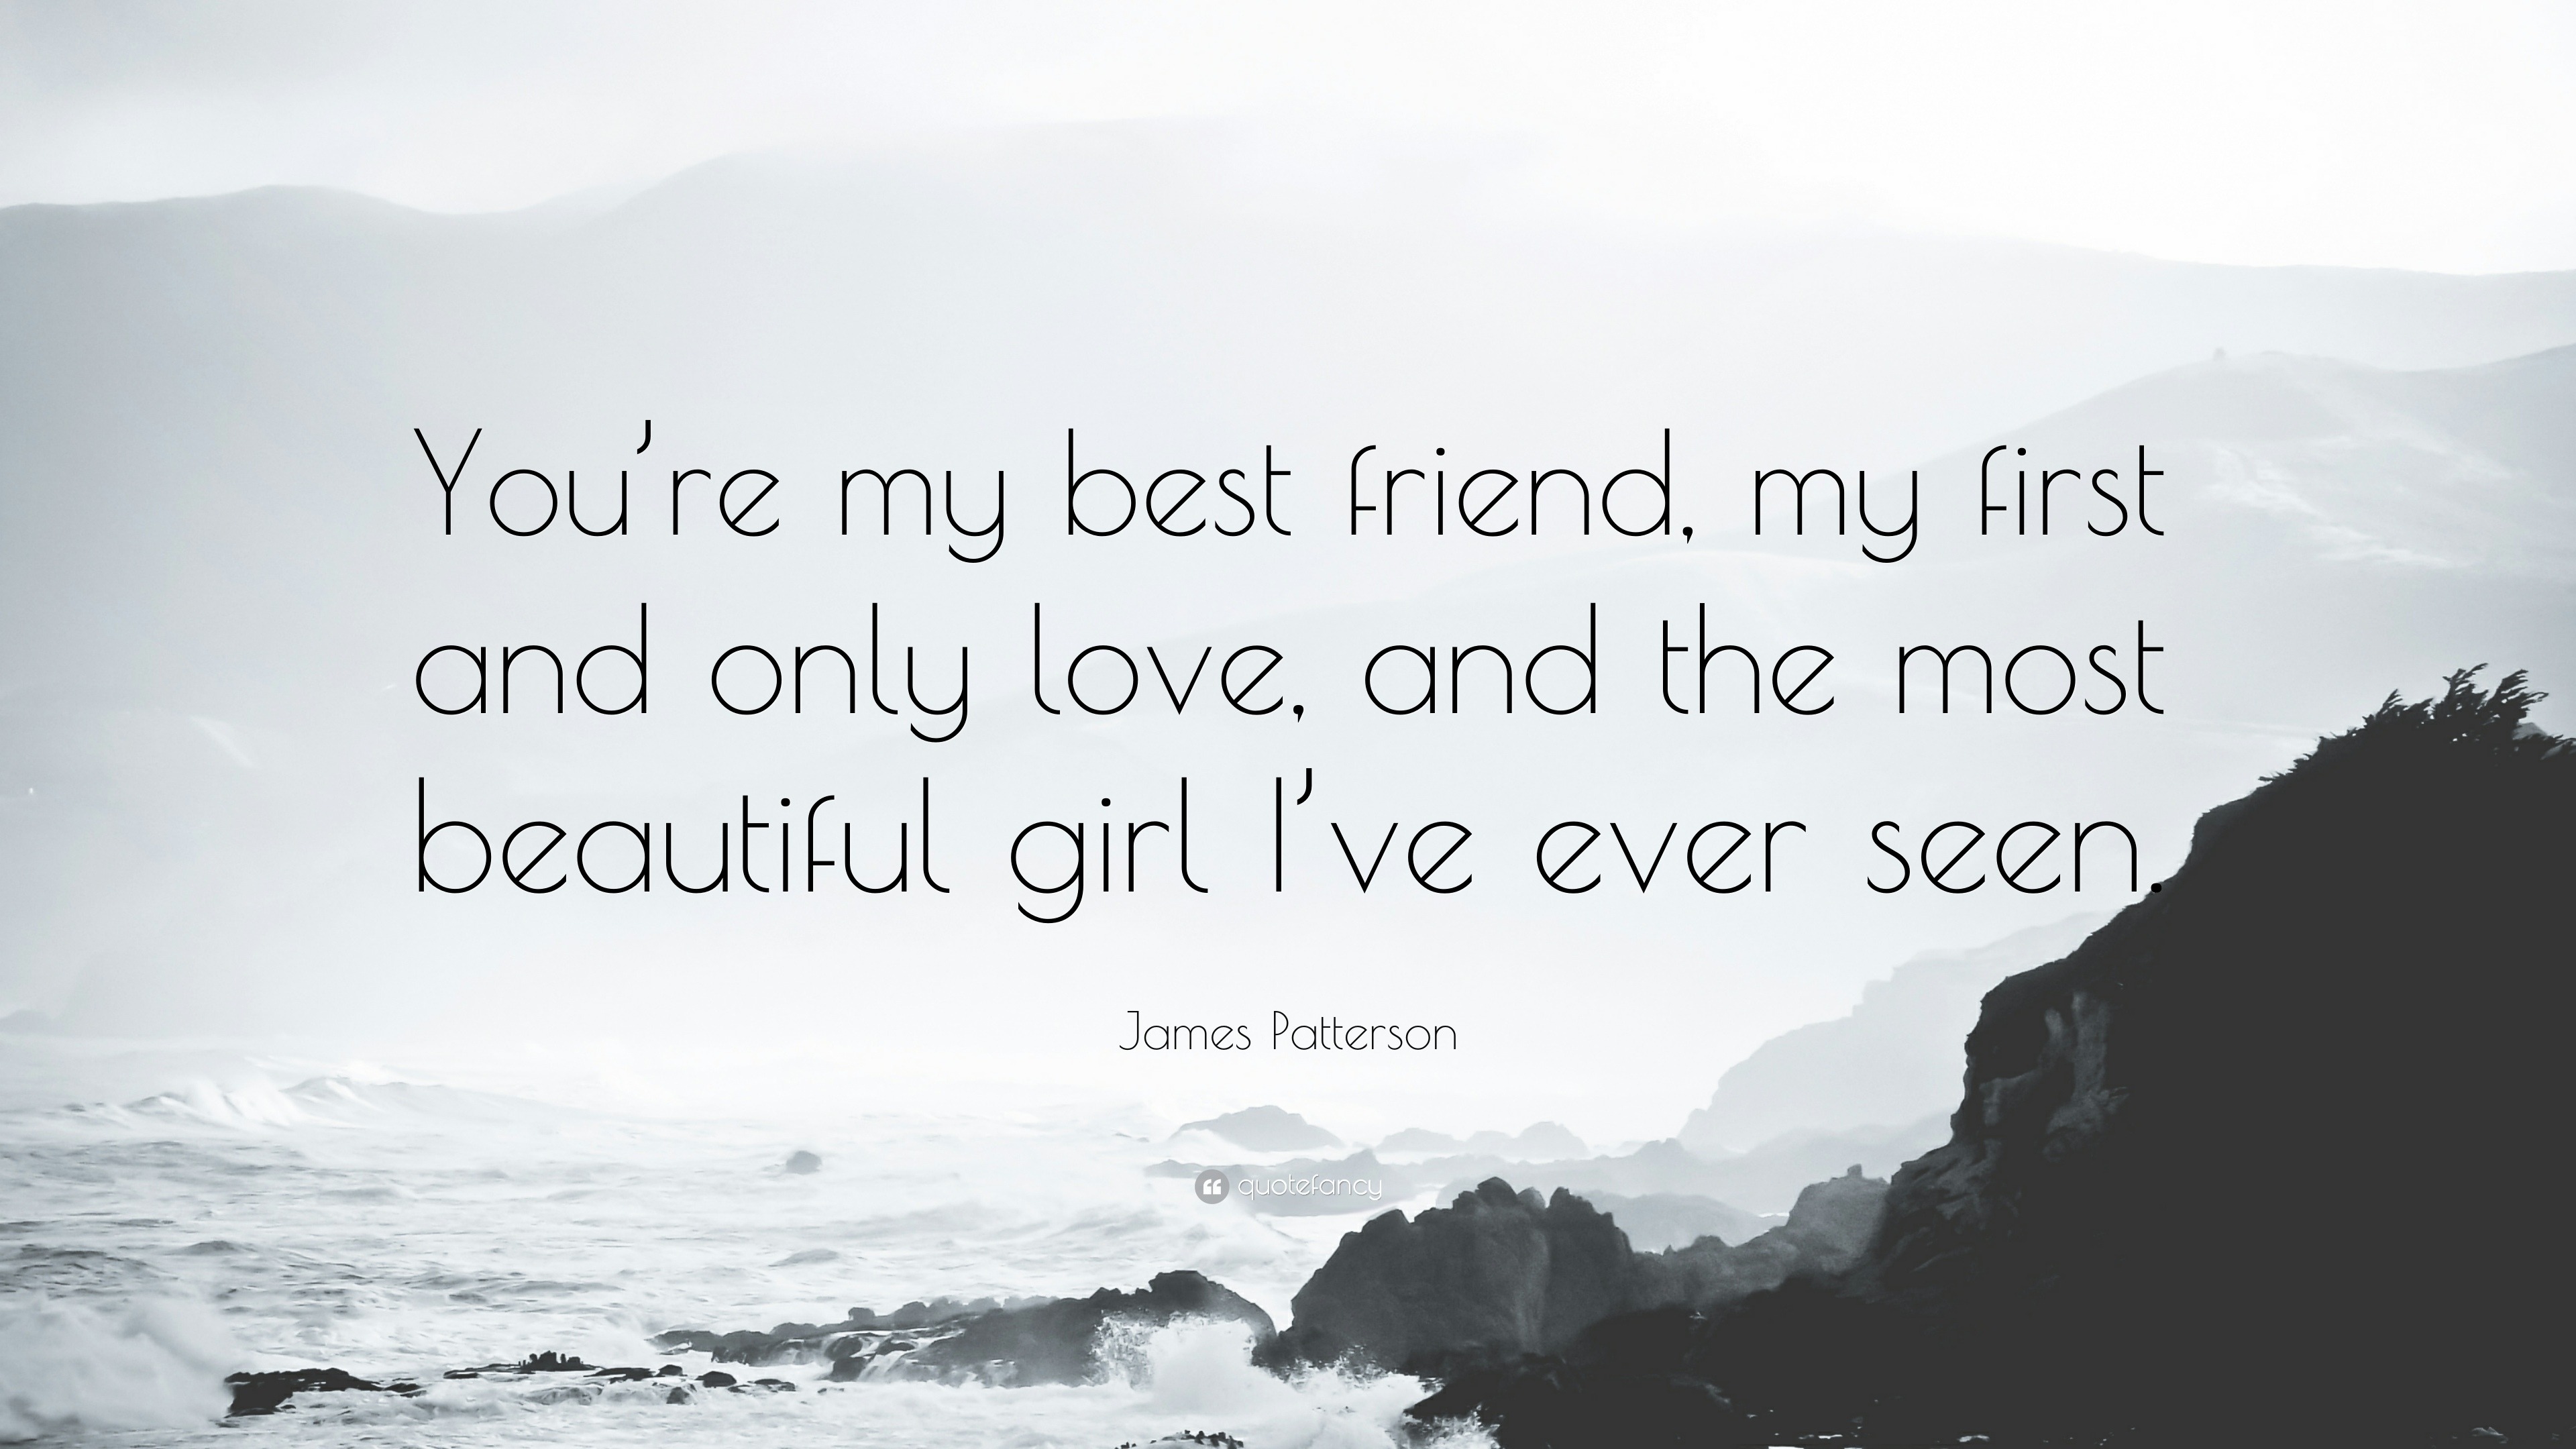 James Patterson Quote “You re my best friend my first and only